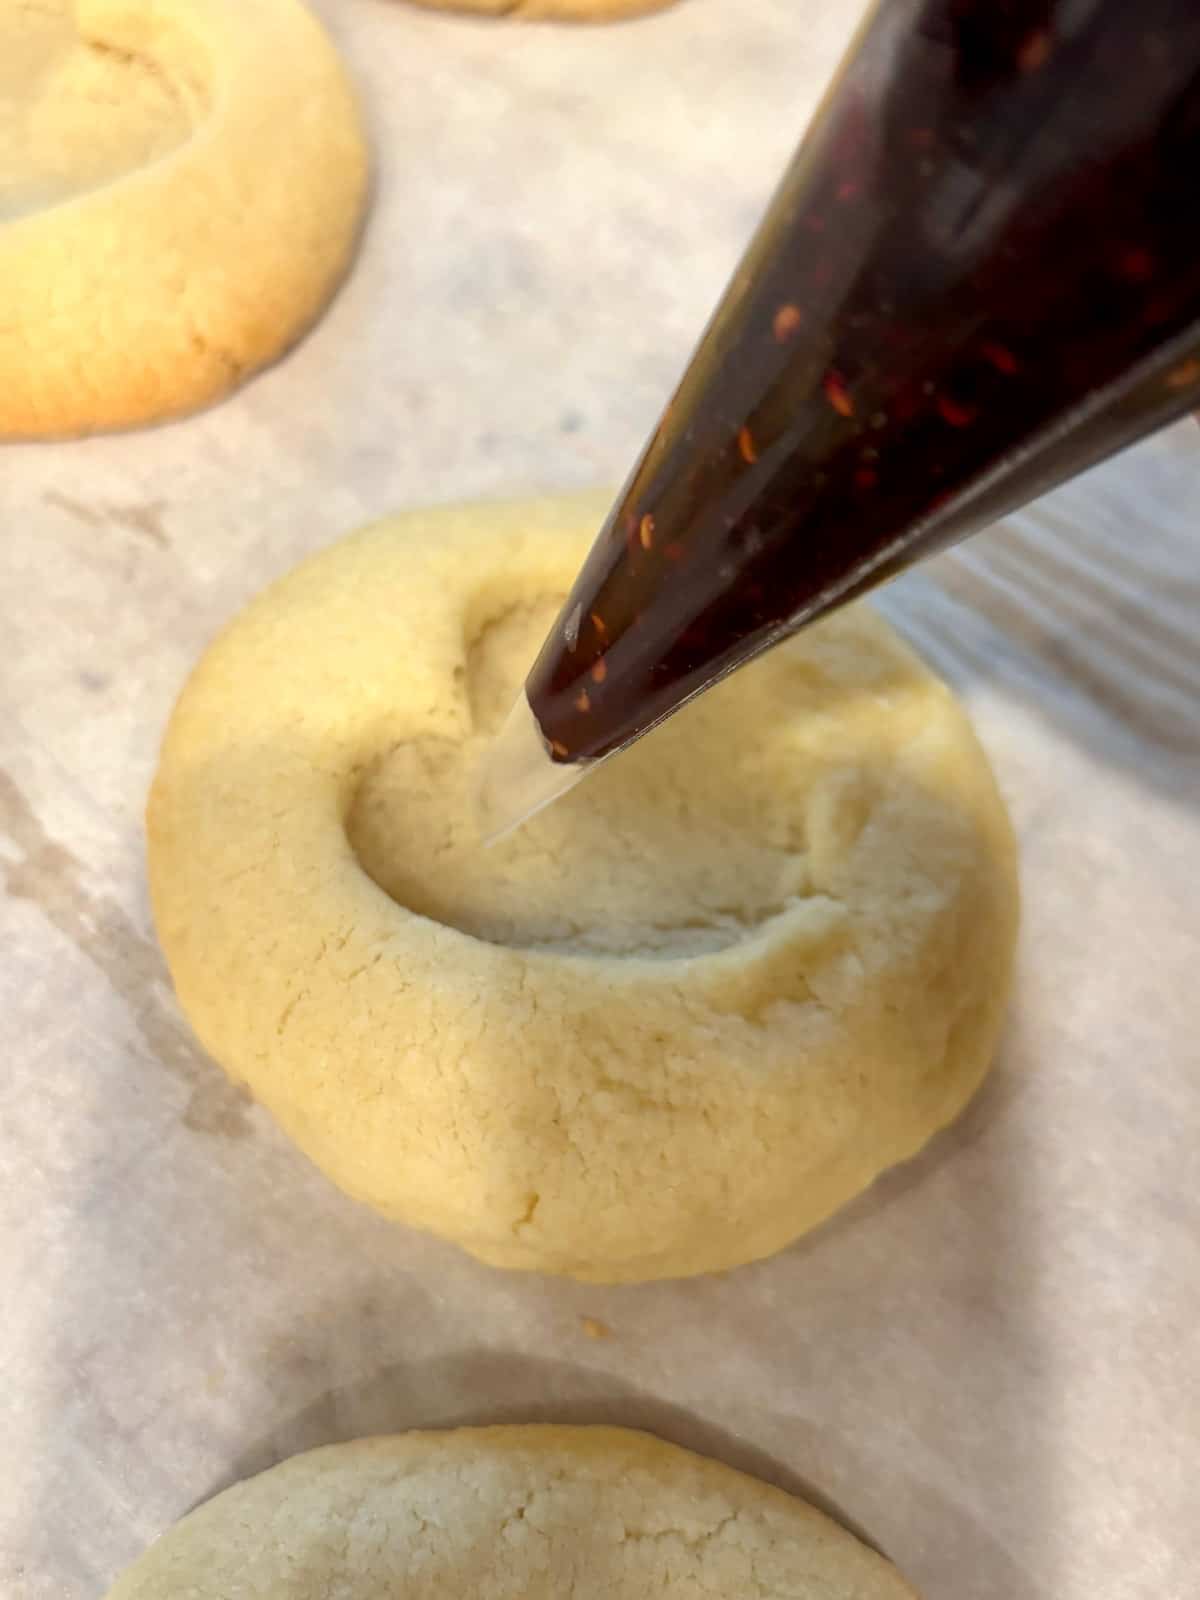 Raspberry jam being piped into an almond thumbprint cookie.